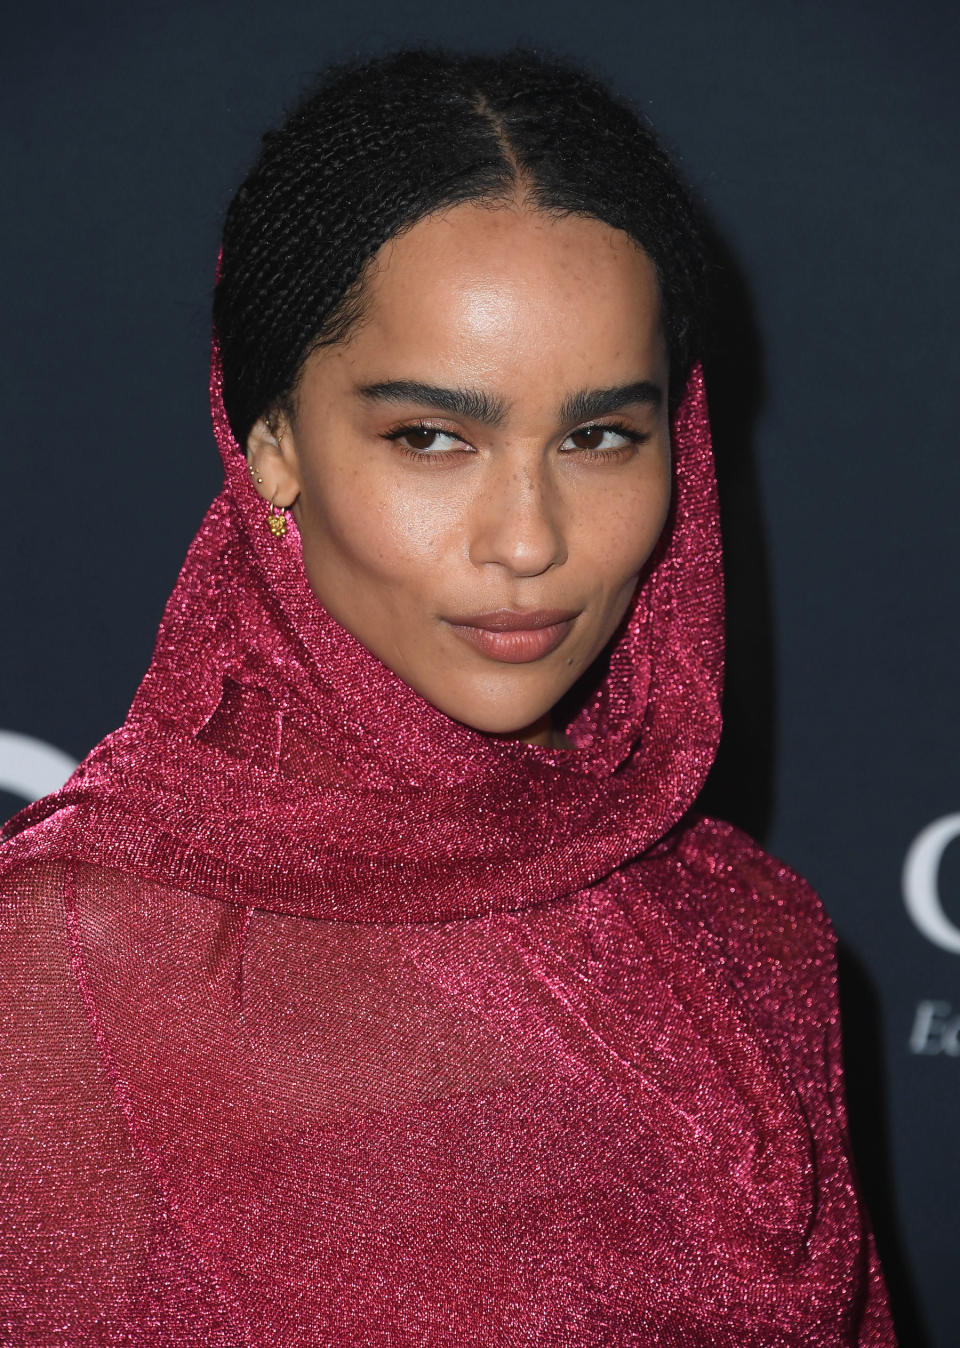 Kravitz at the InStyle Awards in 2021